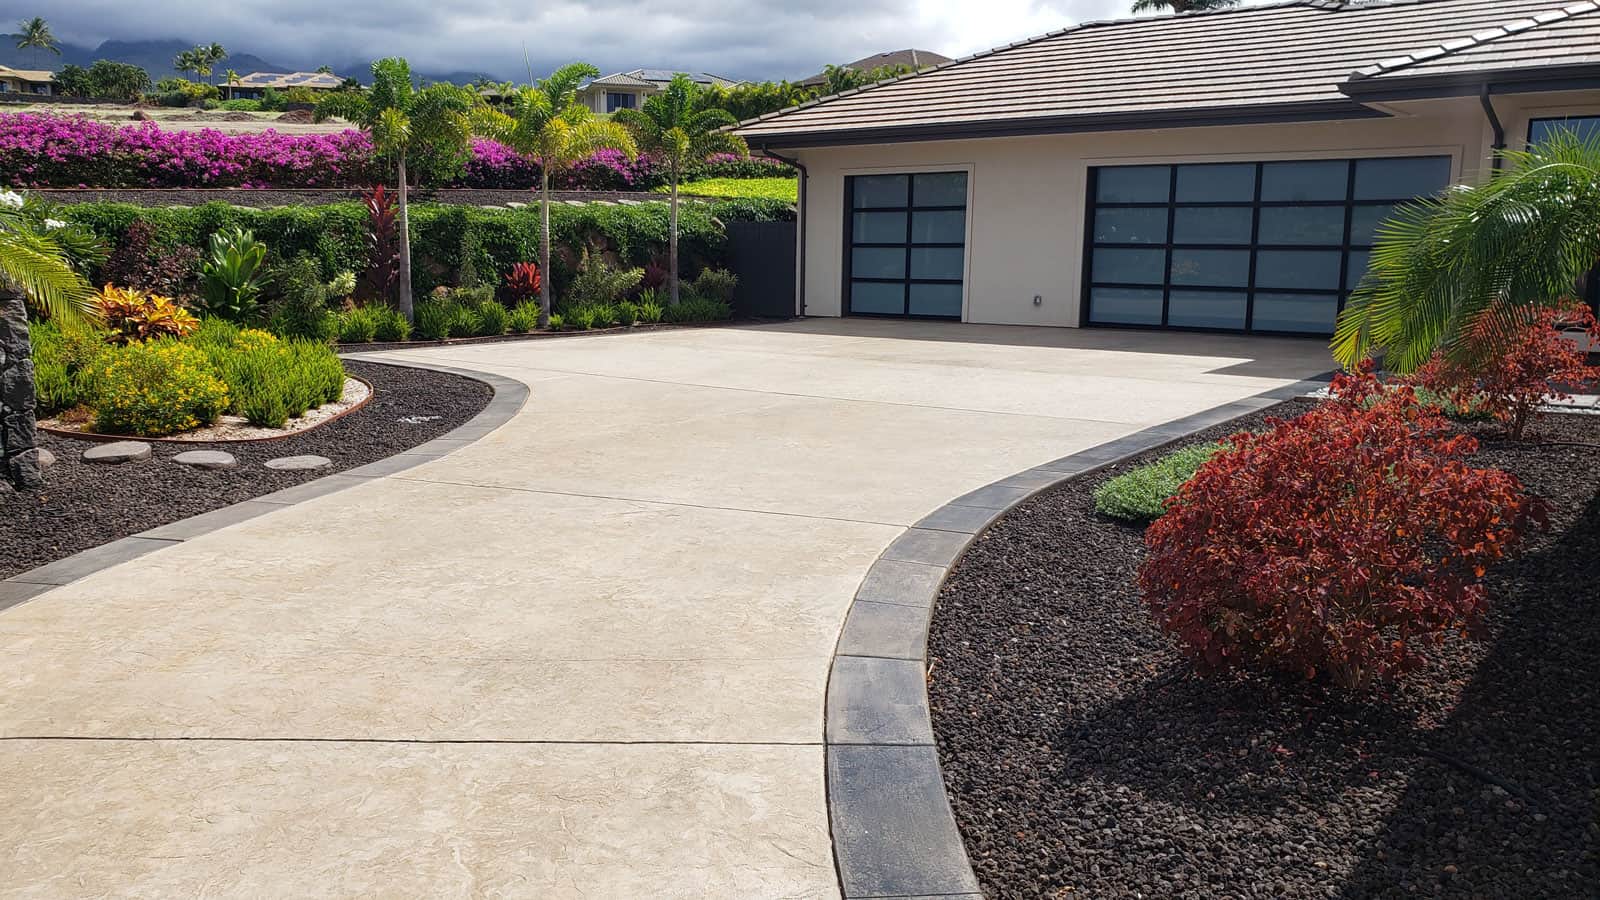 The Art of Arrival Designing Distinctive Driveways with Flair